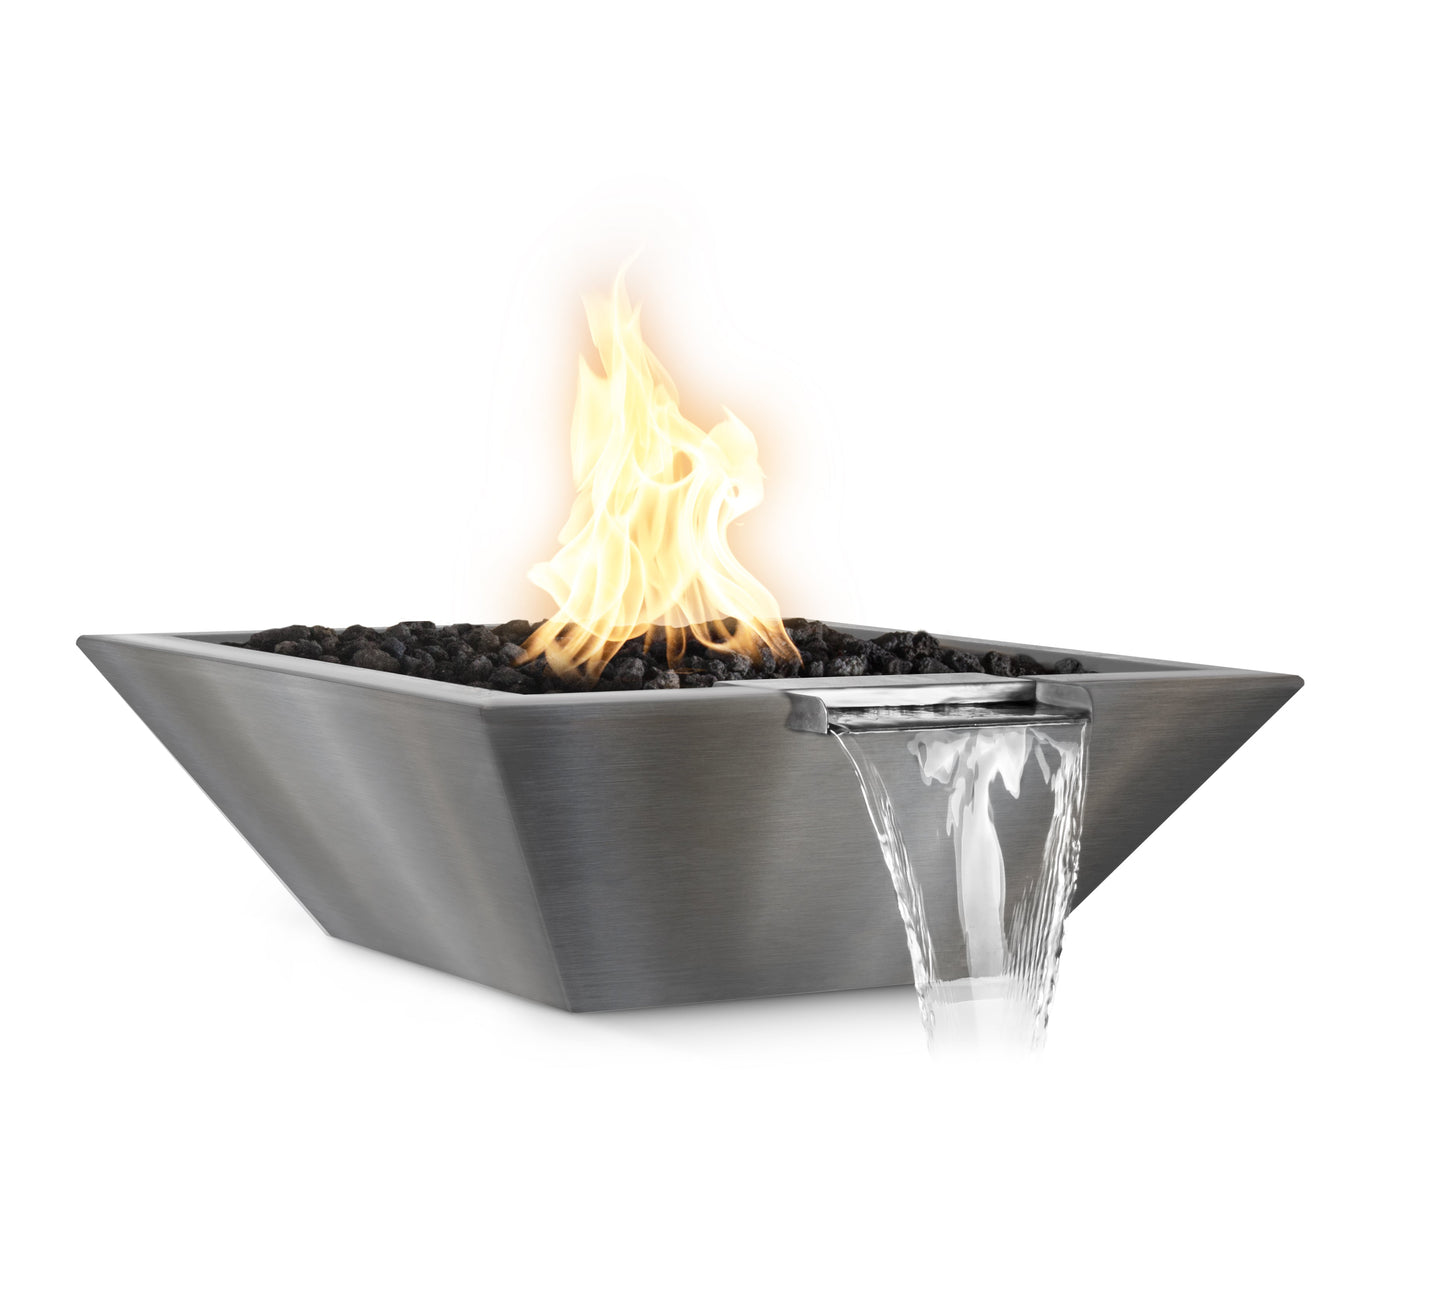 The Outdoor Plus Square Maya 30" Stainless Steel Liquid Propane Fire & Water Bowl with Match Lit Ignition